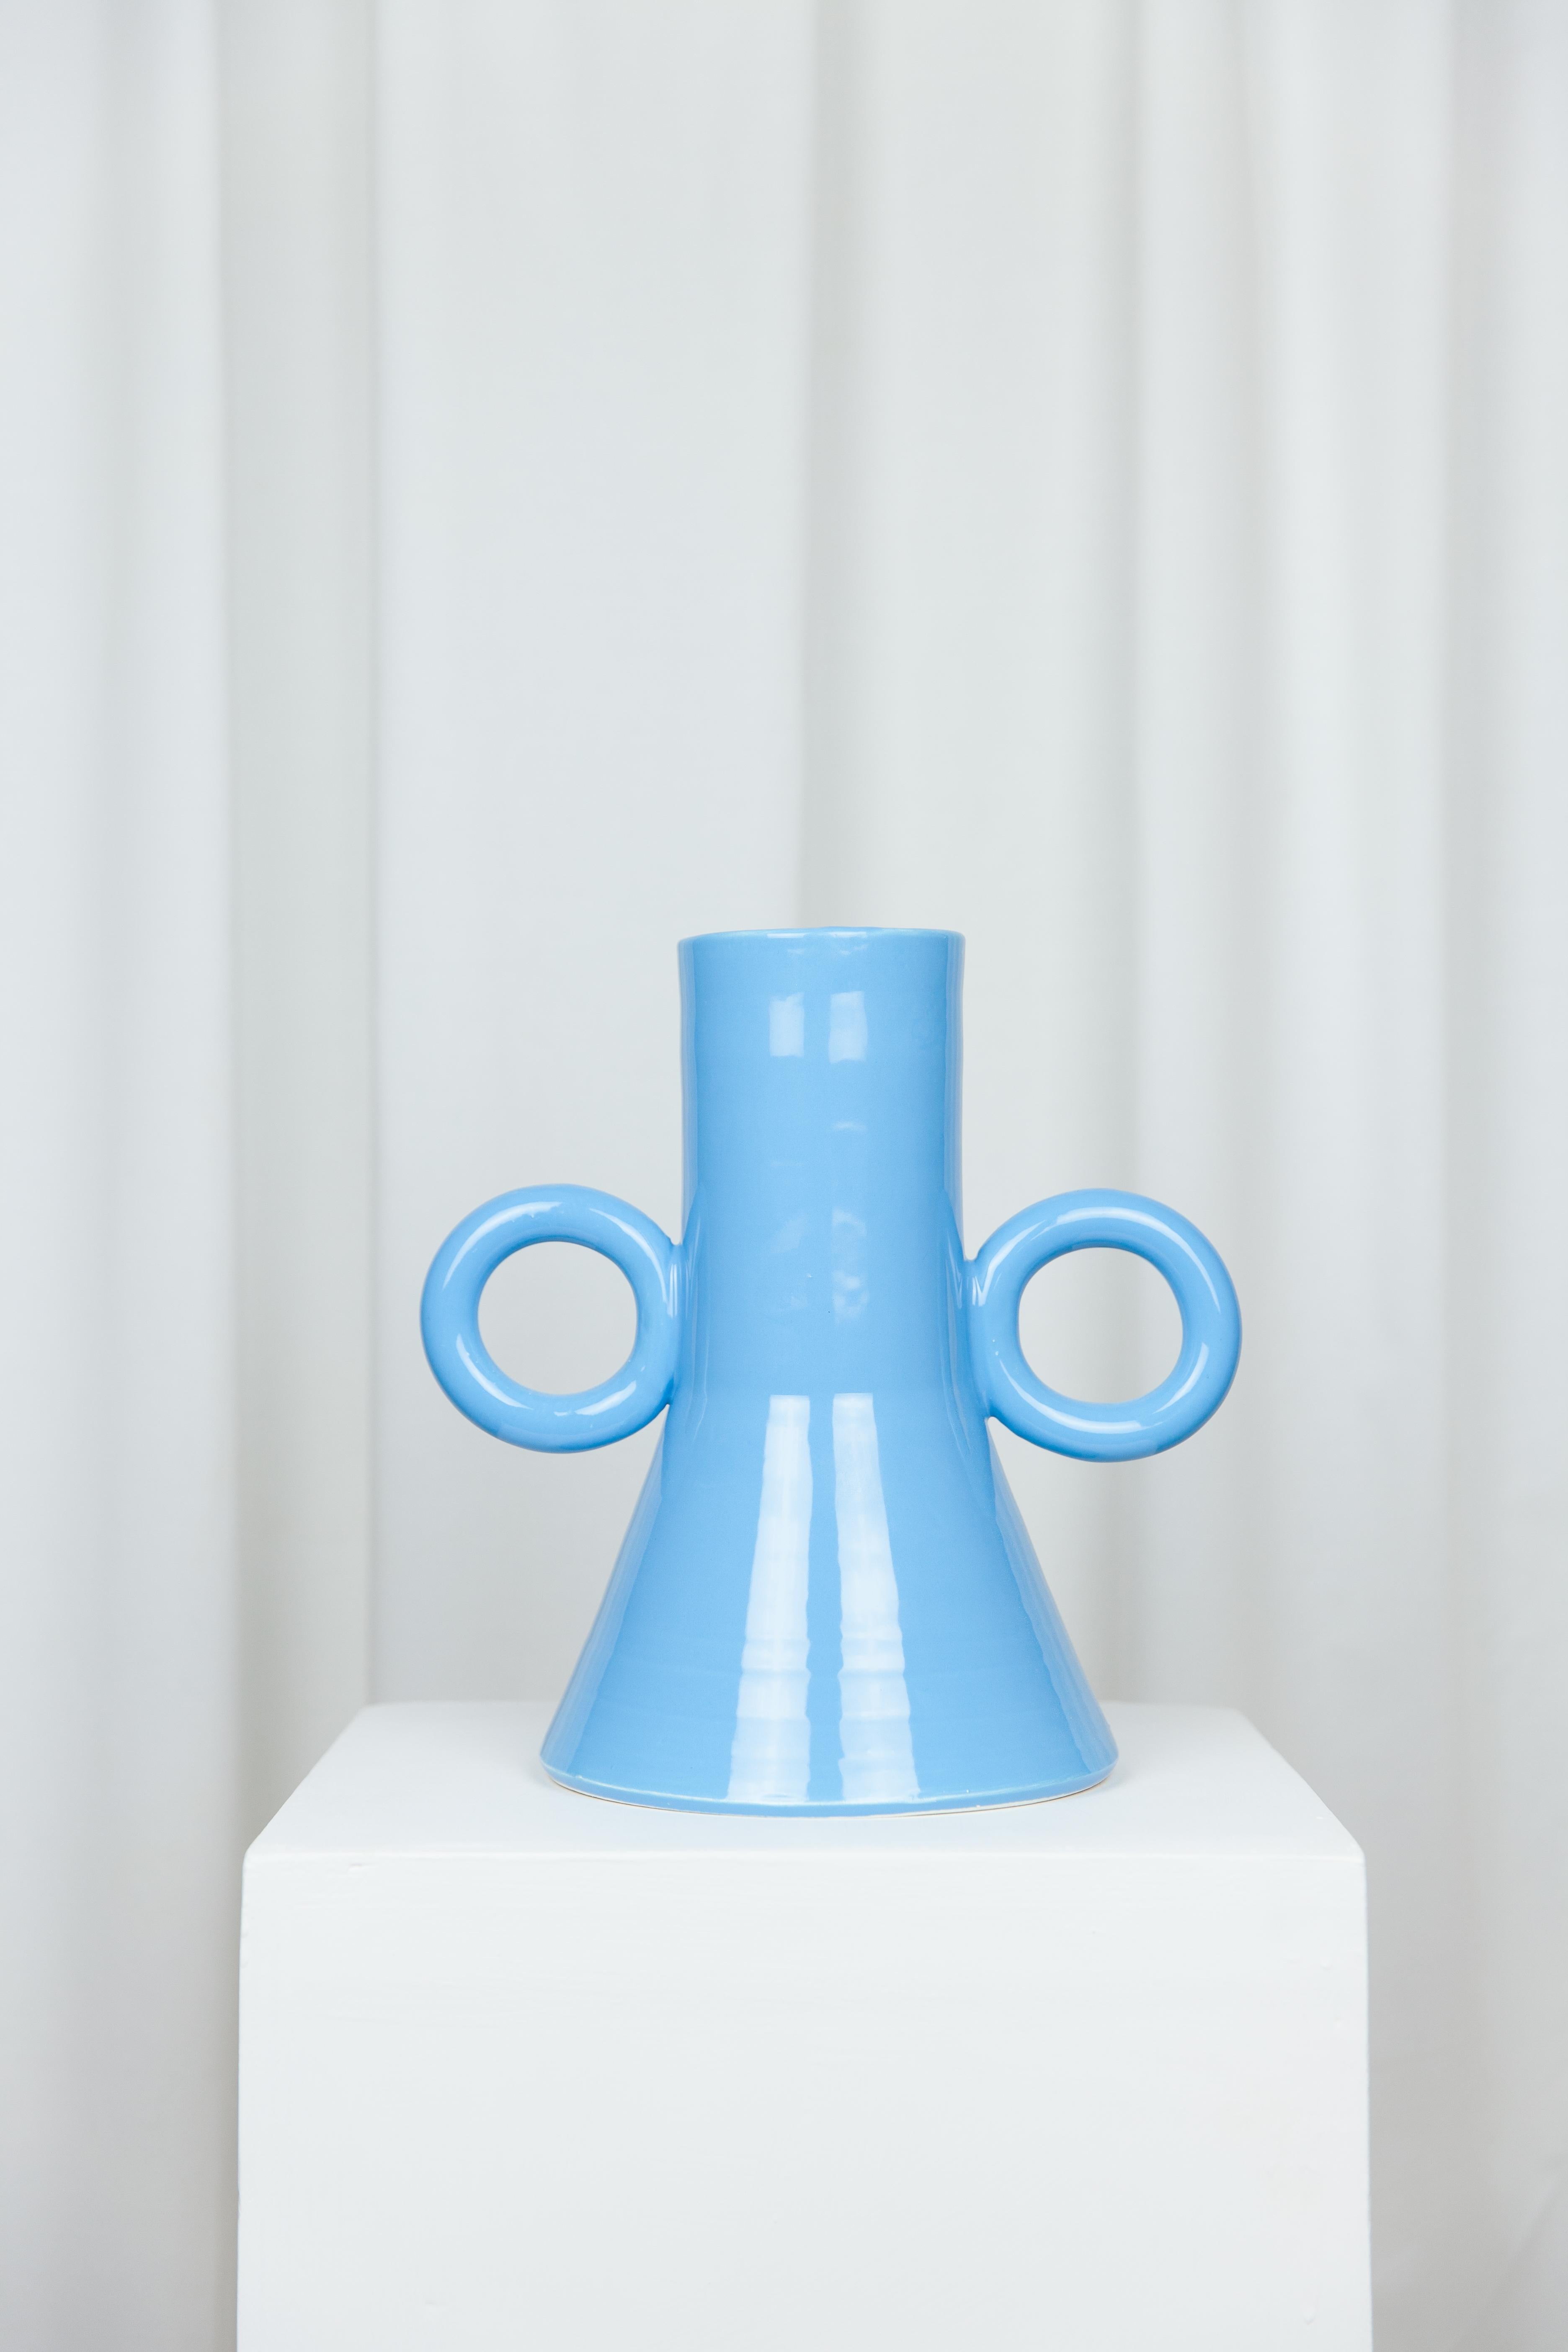 Bigloop vase by Lola Mayeras
Dimensions: D26 x W118 x W26 cm
Materials: Earthenware.

Vase in white earthenware, glazed in blue. This piece is designed and handcrafted in the south of France.

Lola Mayeras — Designer 
In parallel with her